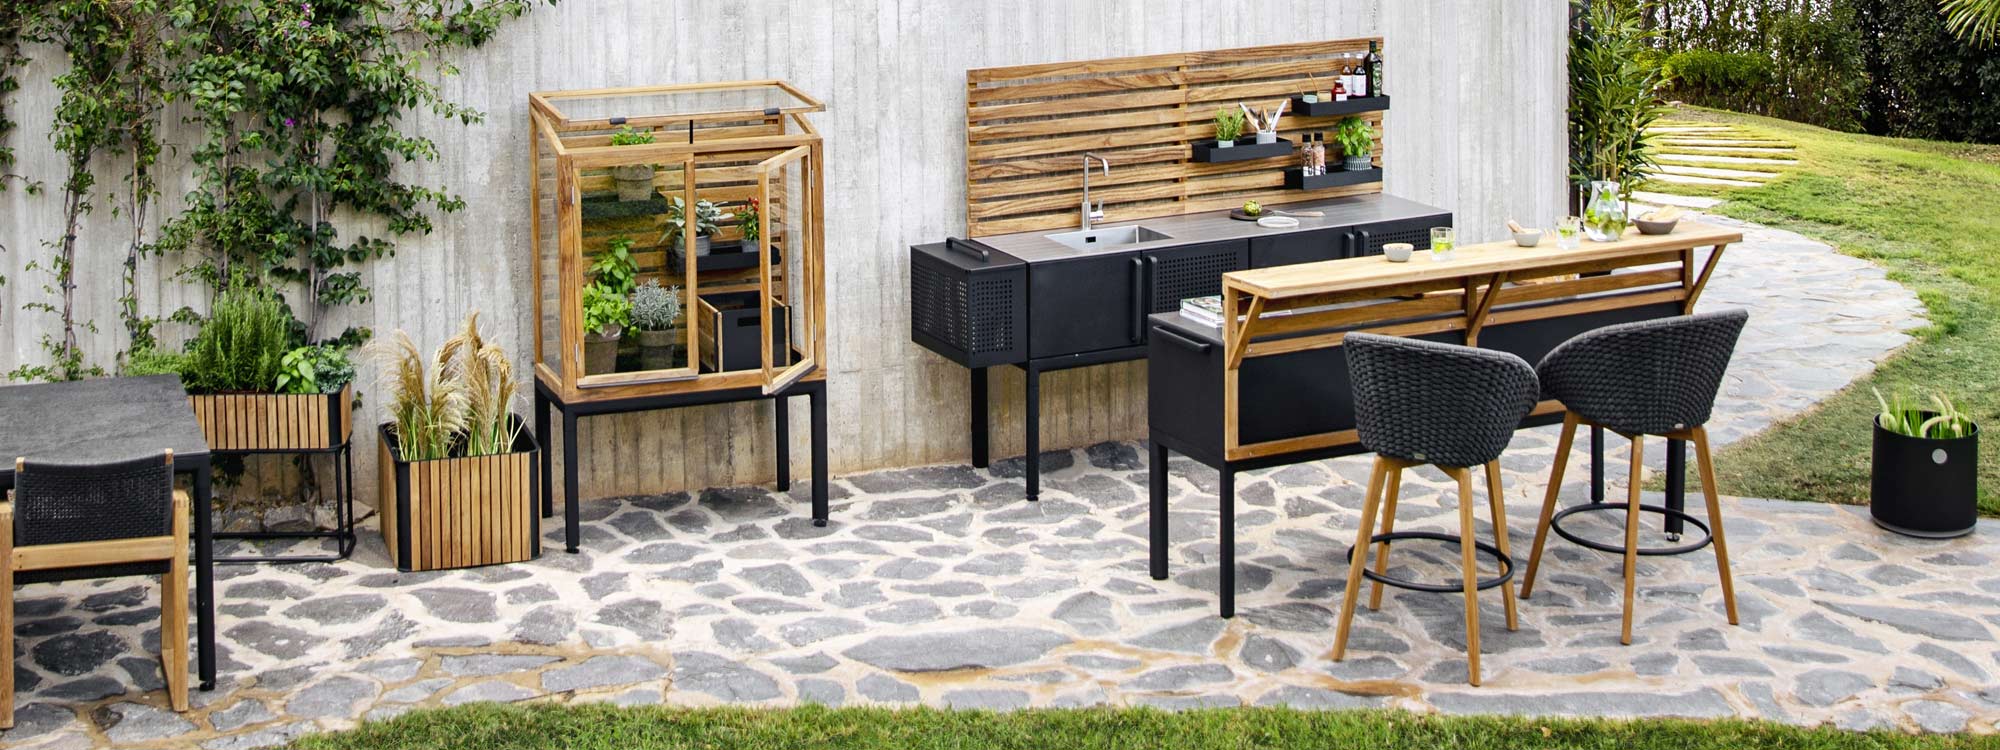 Image of Drop outdoor bar counter in lava-grey aluminum and teak with Peacock garden bar chairs by Cane-line